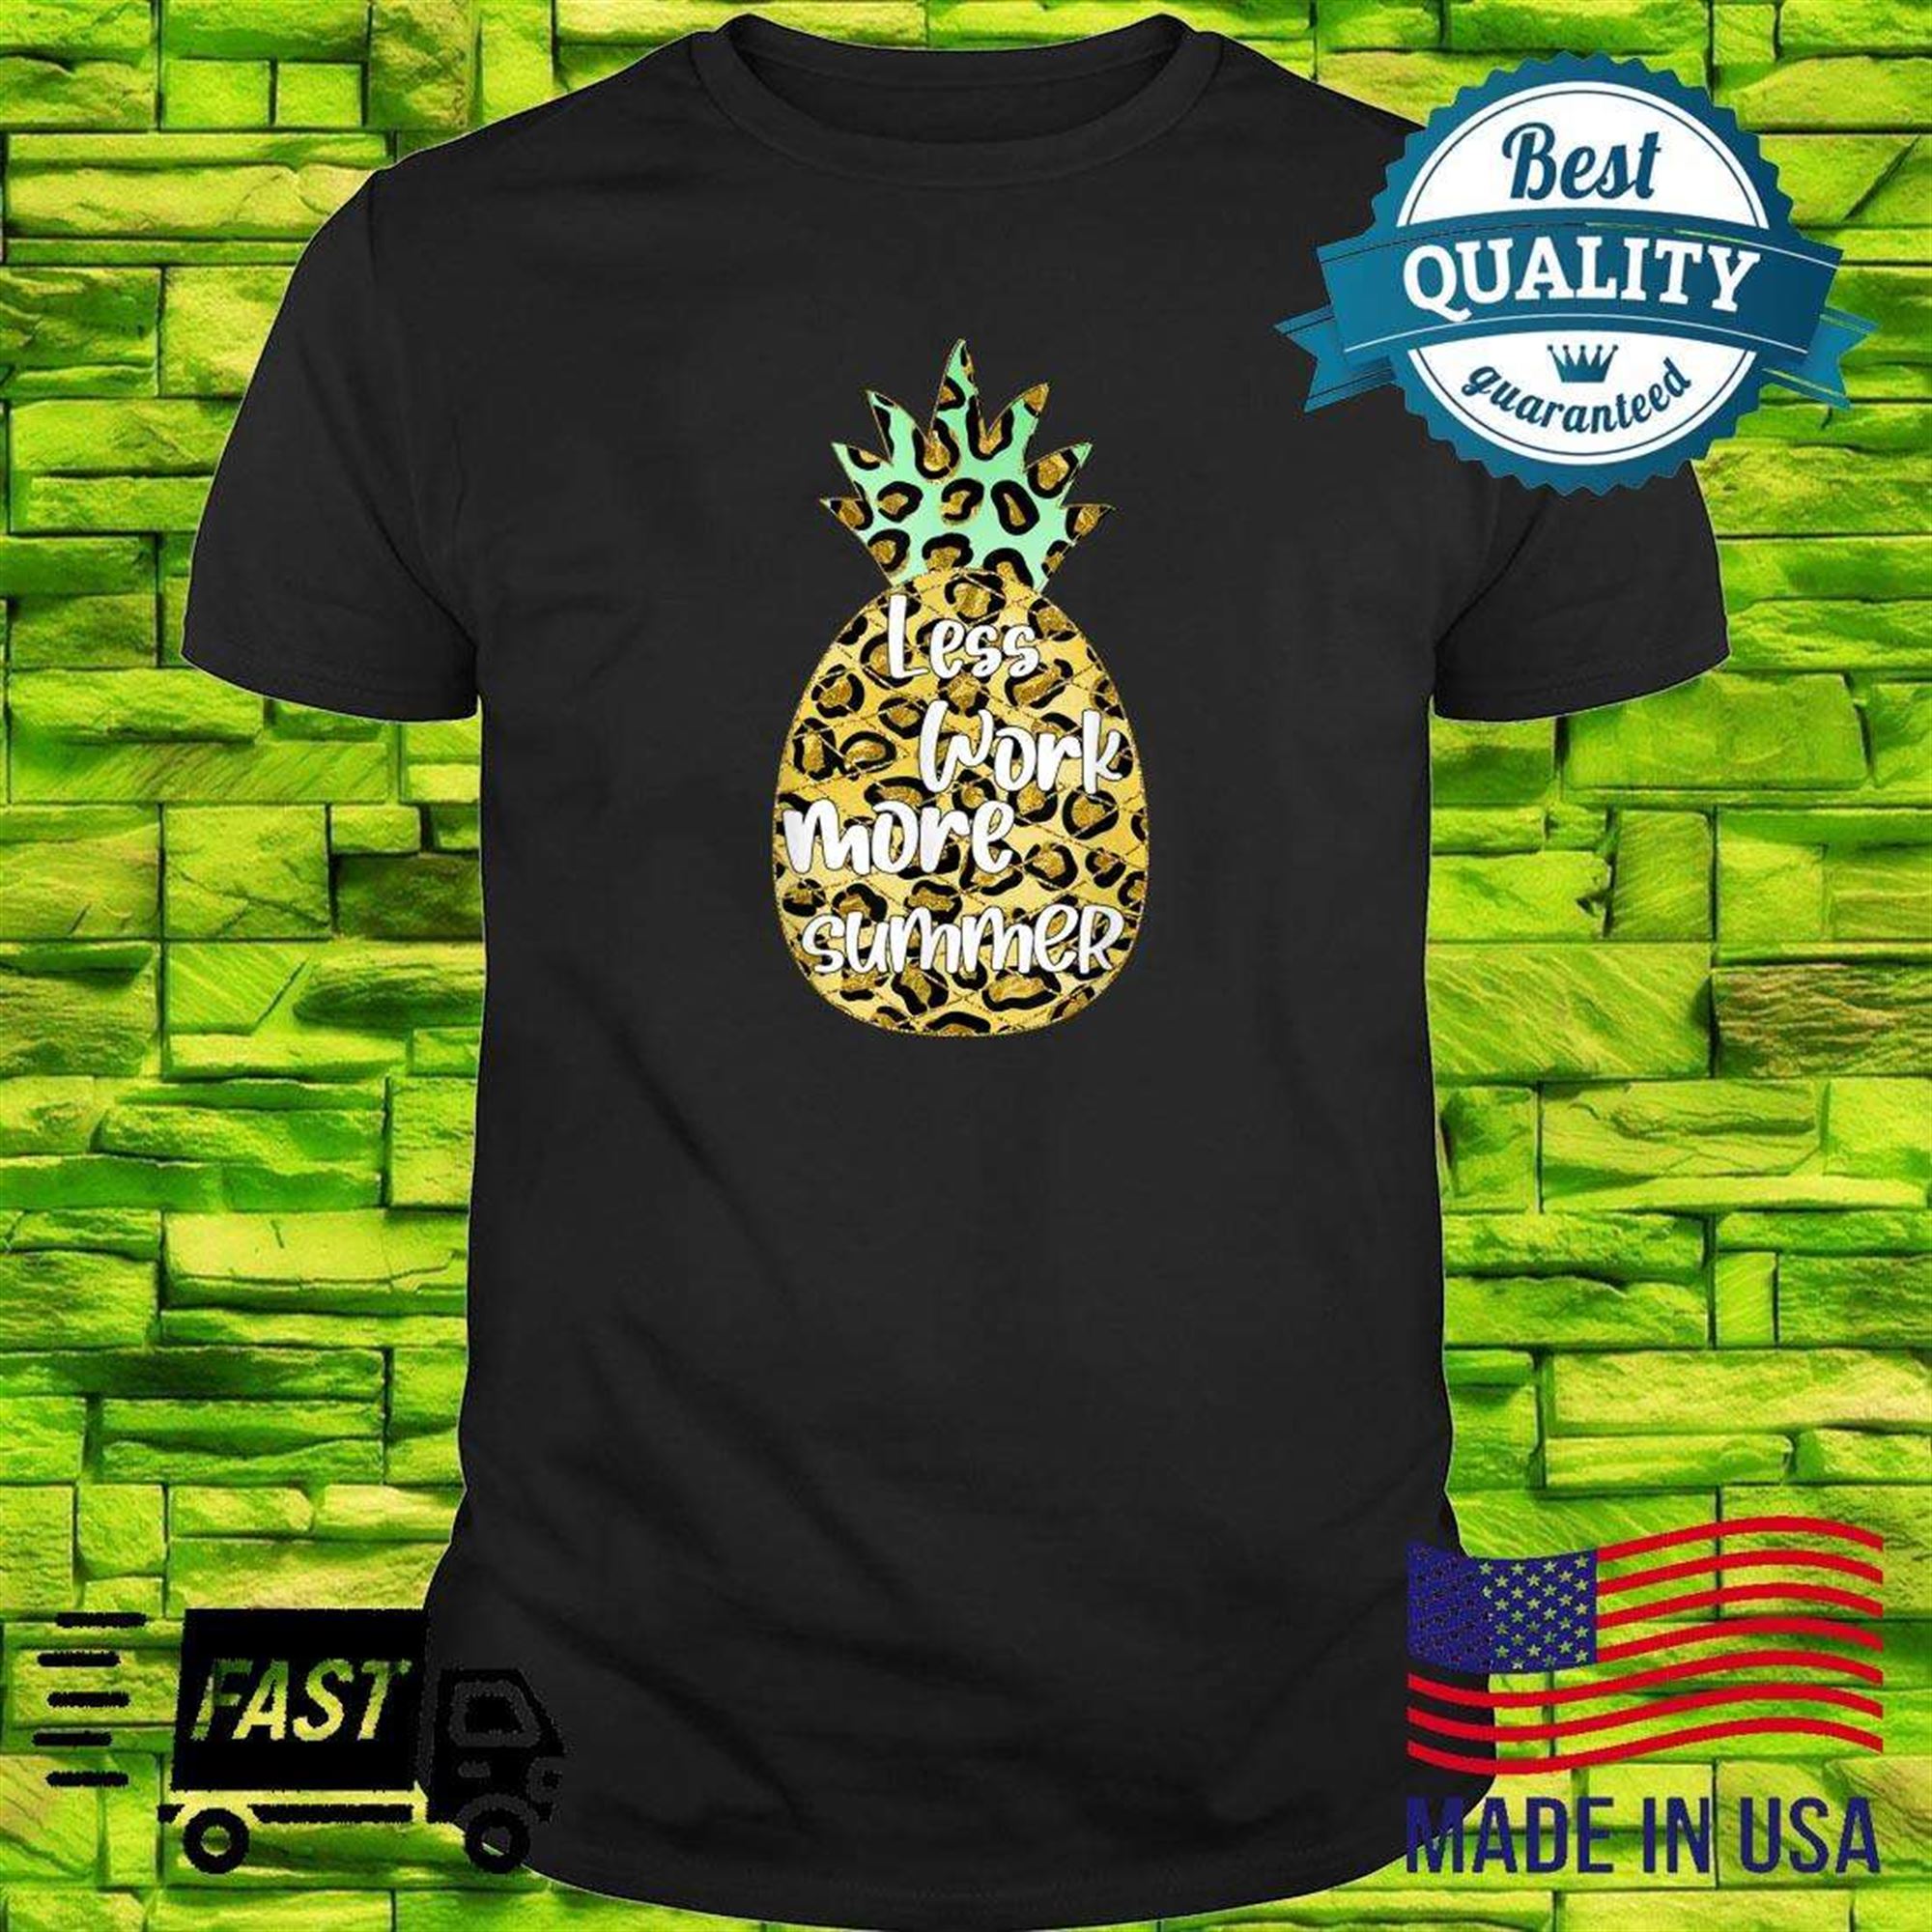 Funny Pineapple Hawaiian Tropical Fruit Plussize T-shirt Size Up To 5xl